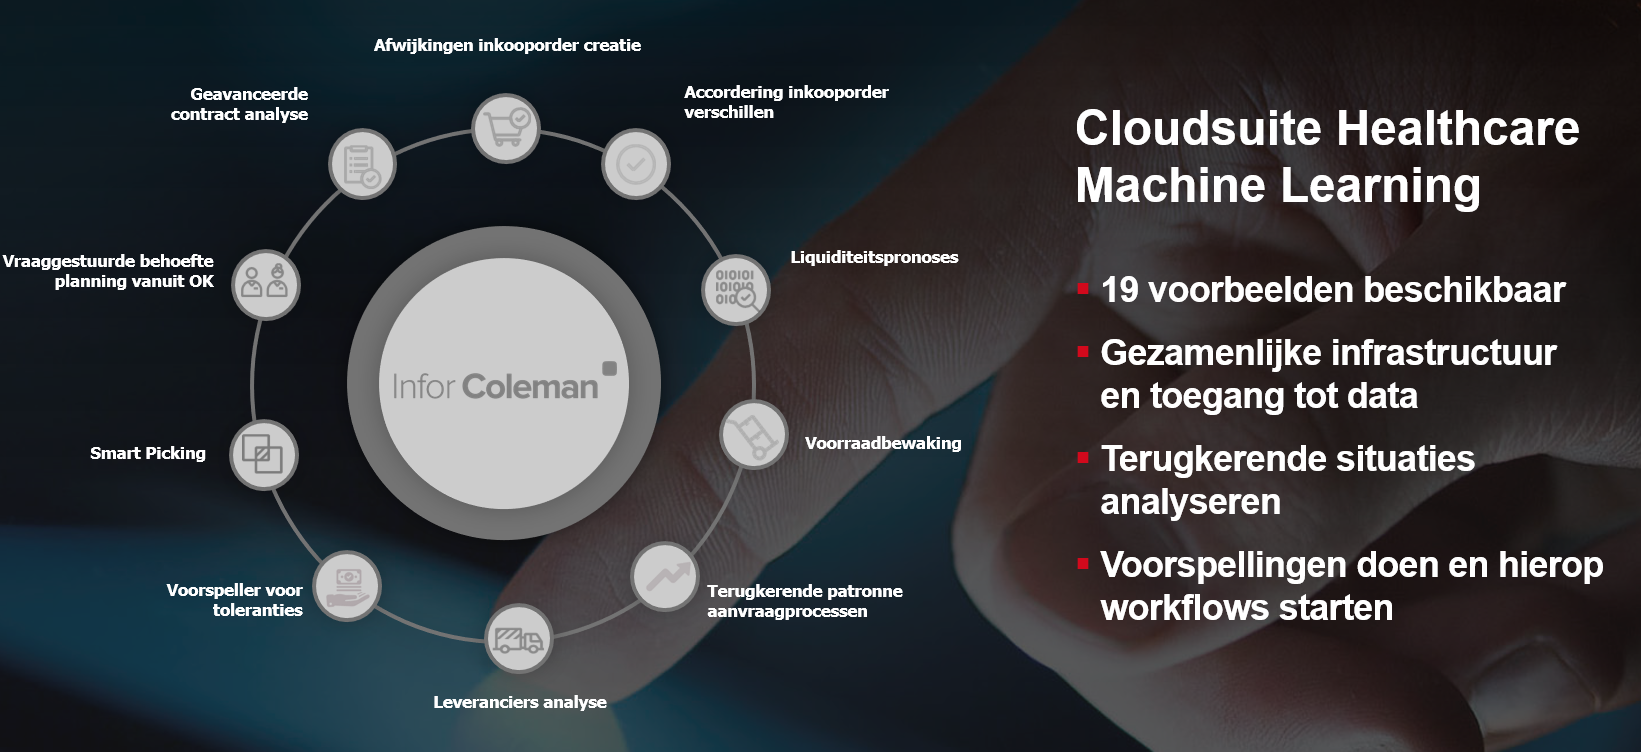 Cloudsuite Healthcare Machine Learning